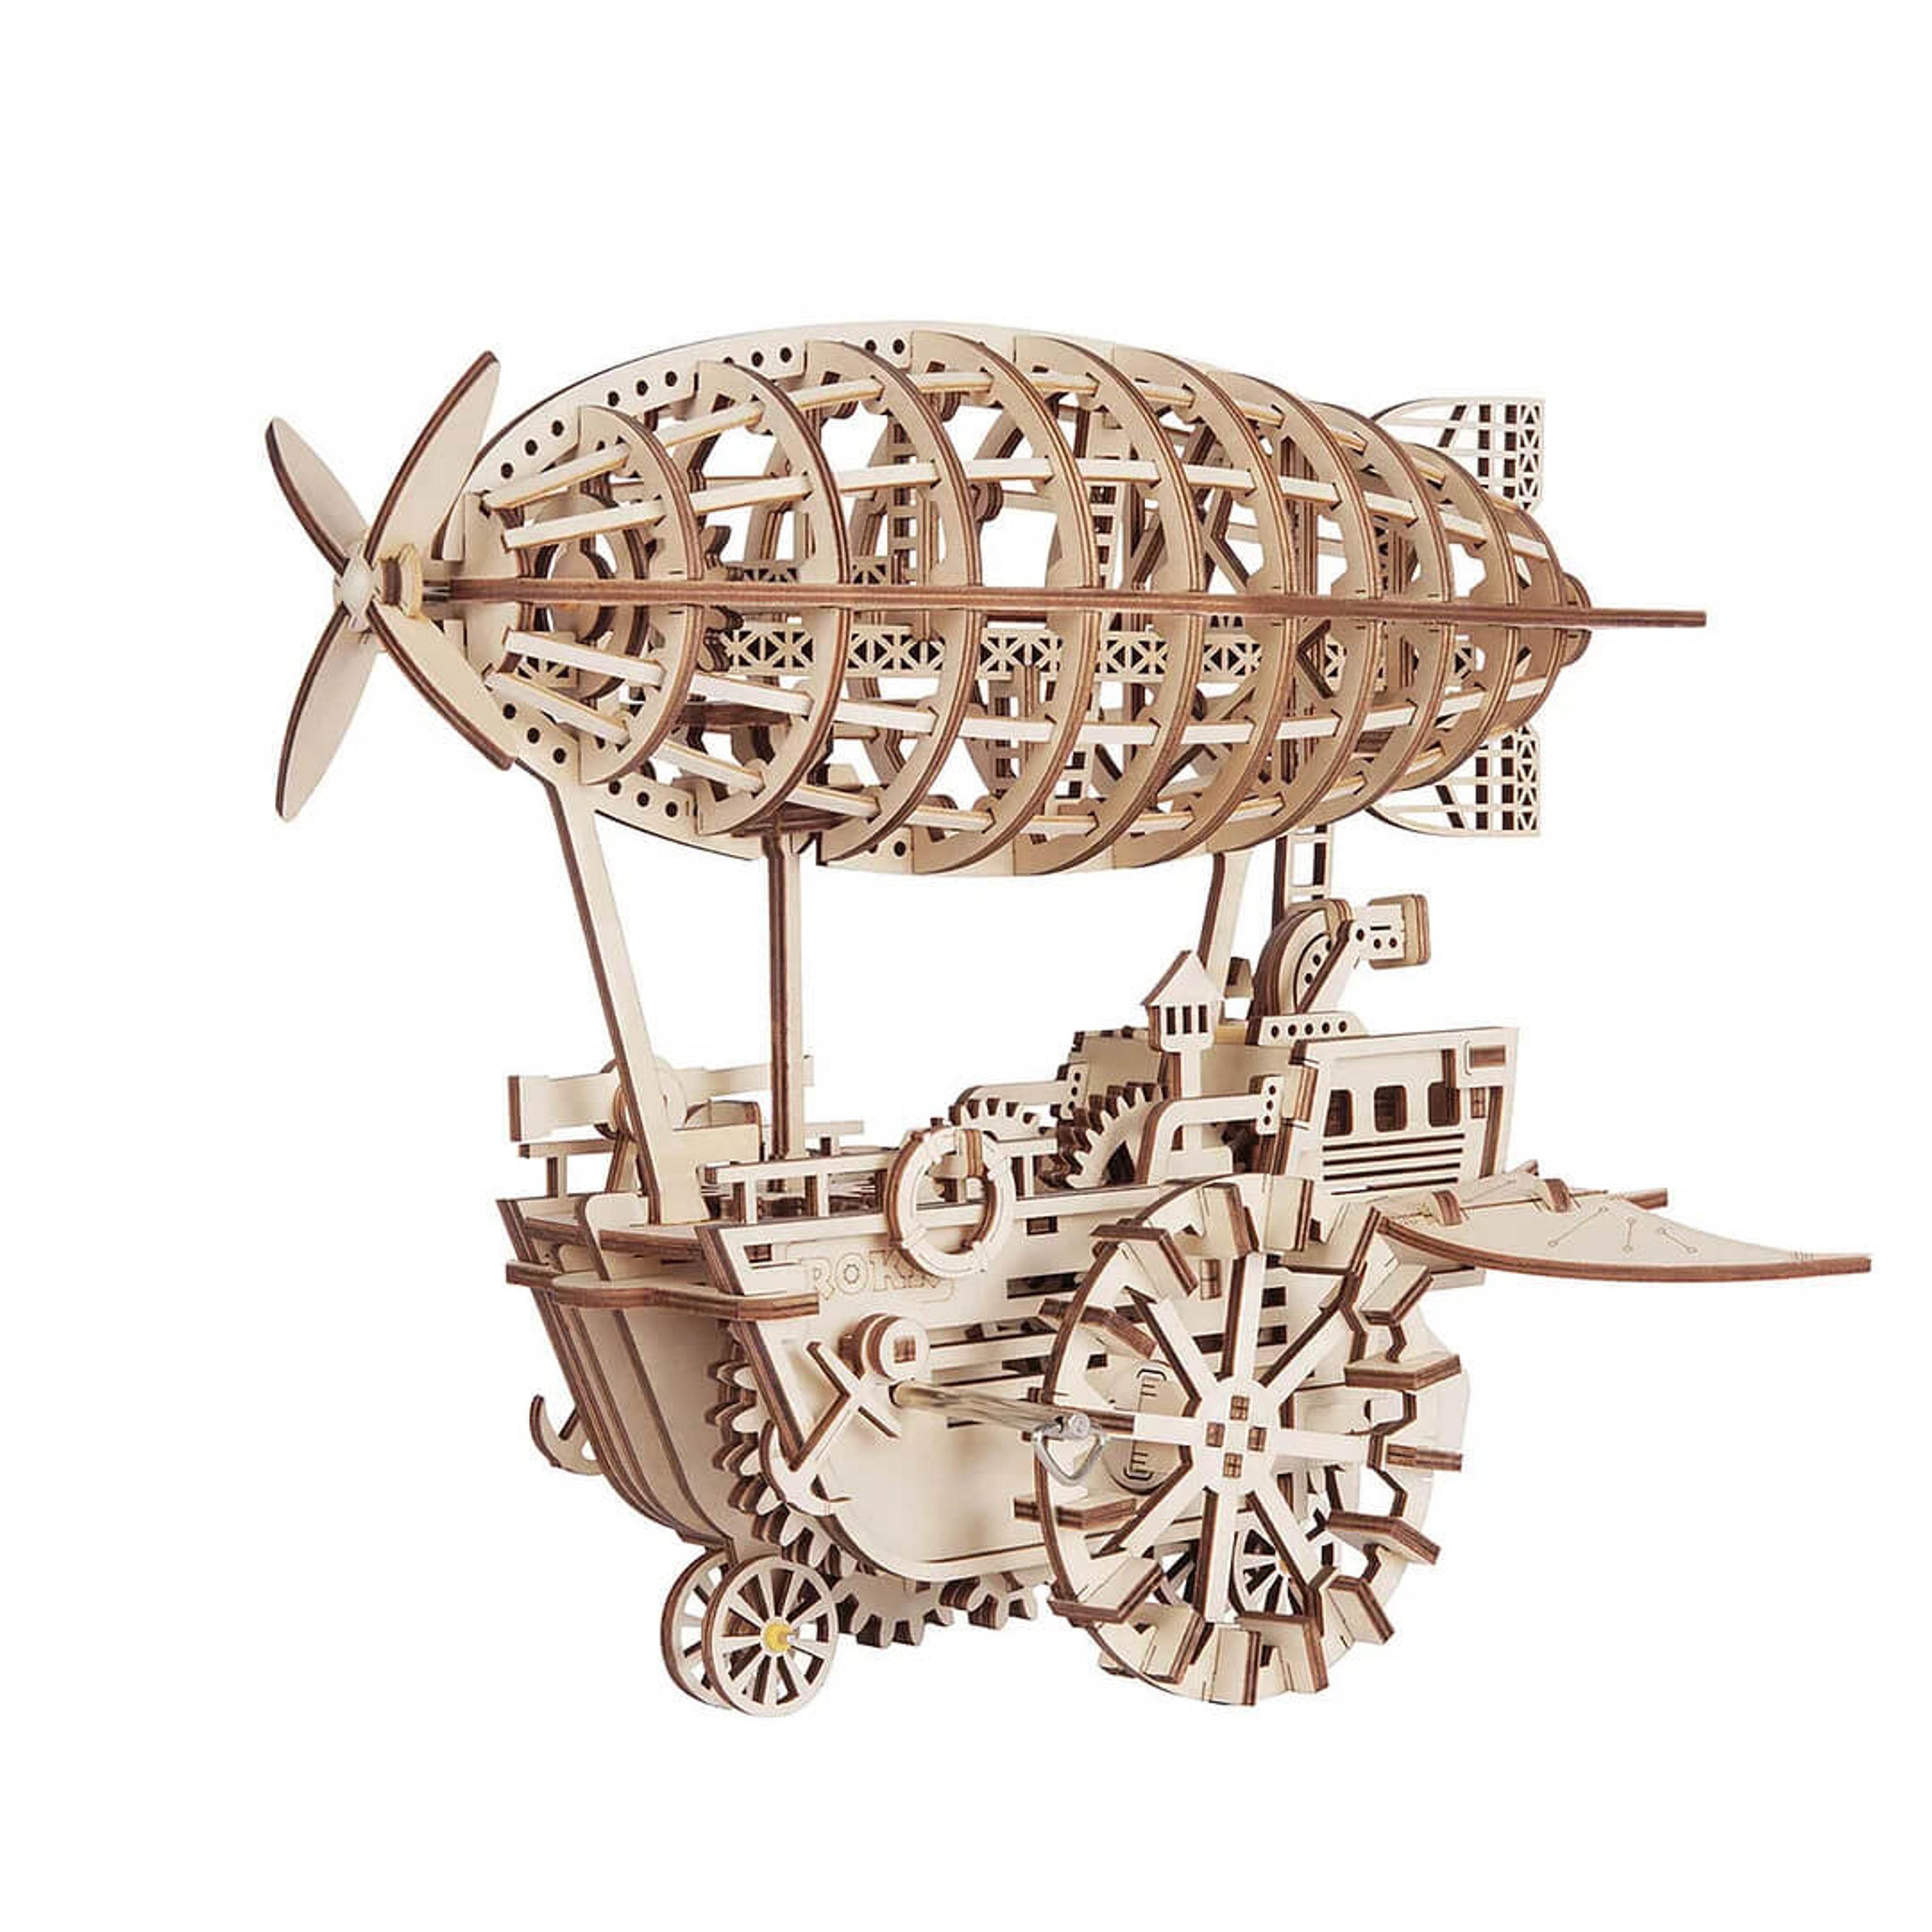 Air Vehicle Mechanical Airship 3D Wooden Puzzle